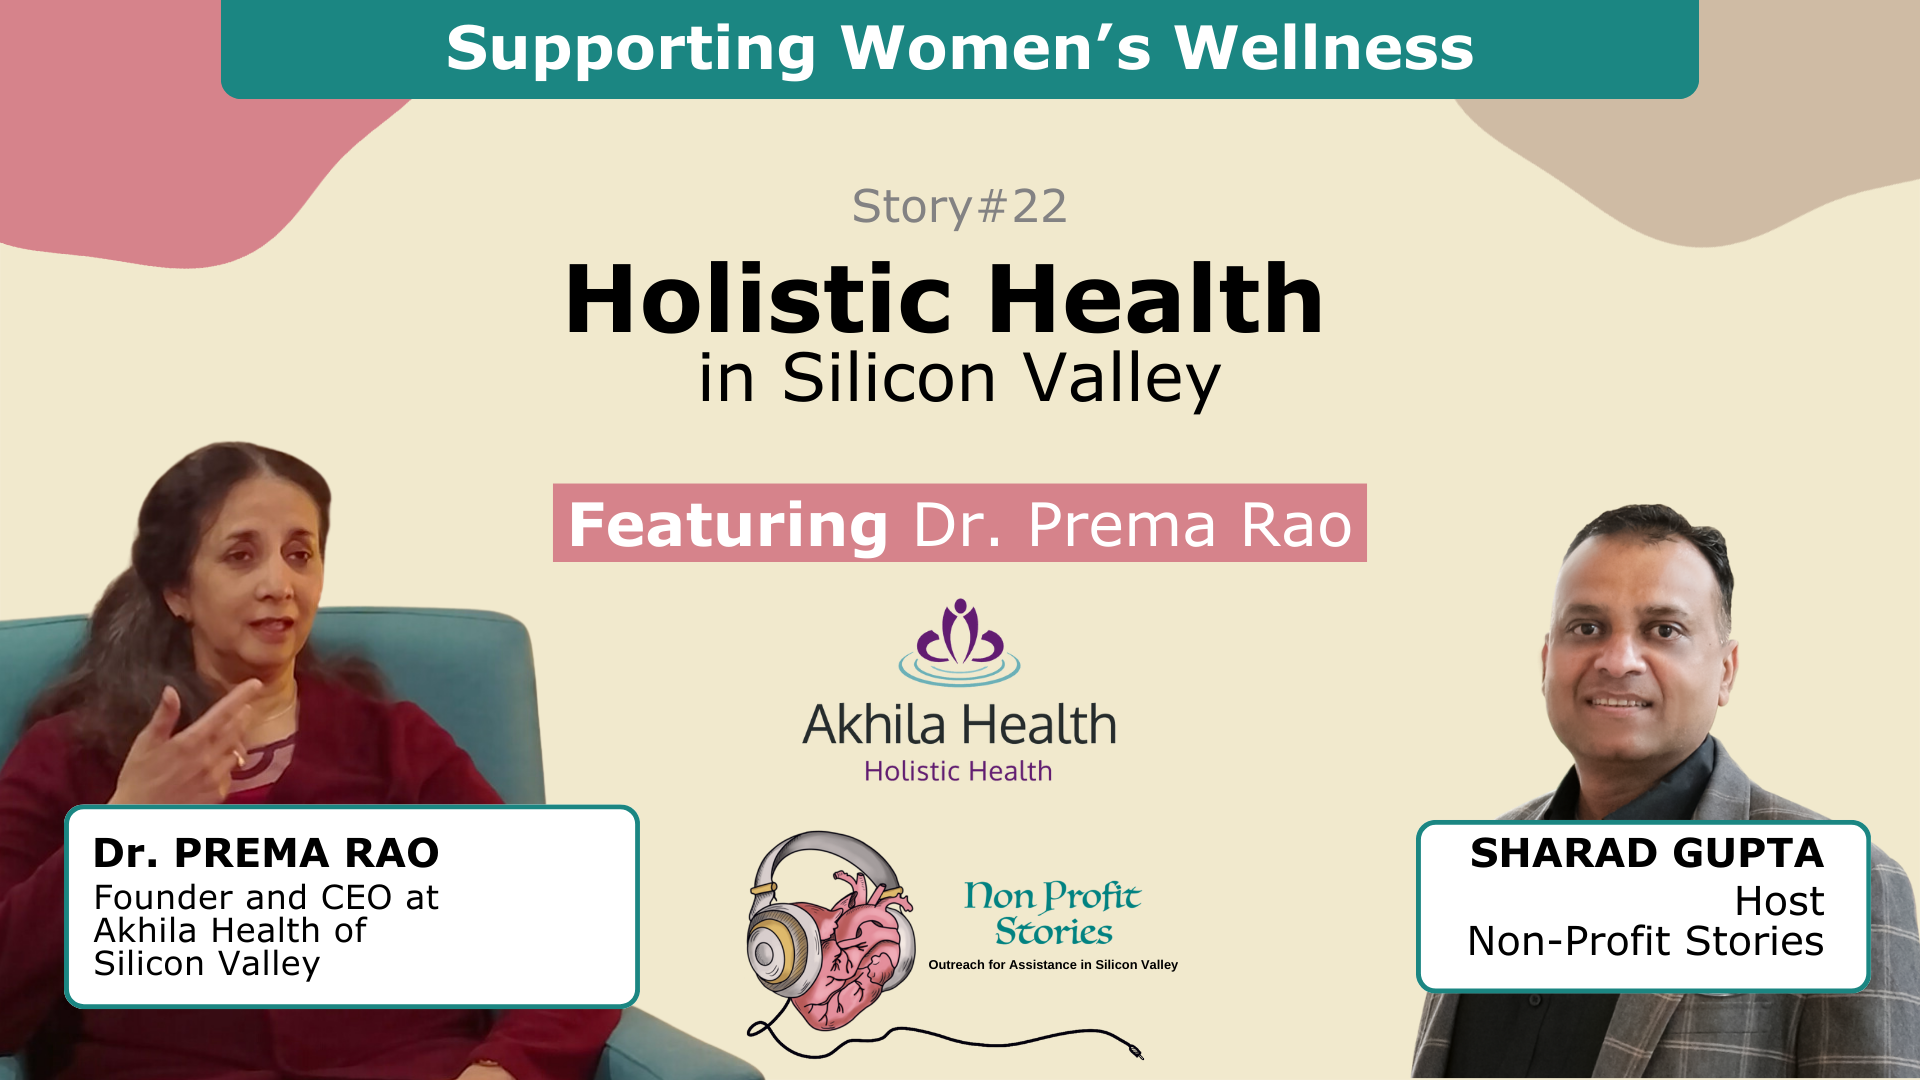 Holistic Health: Supporting Women's Wellness in Silicon Valley